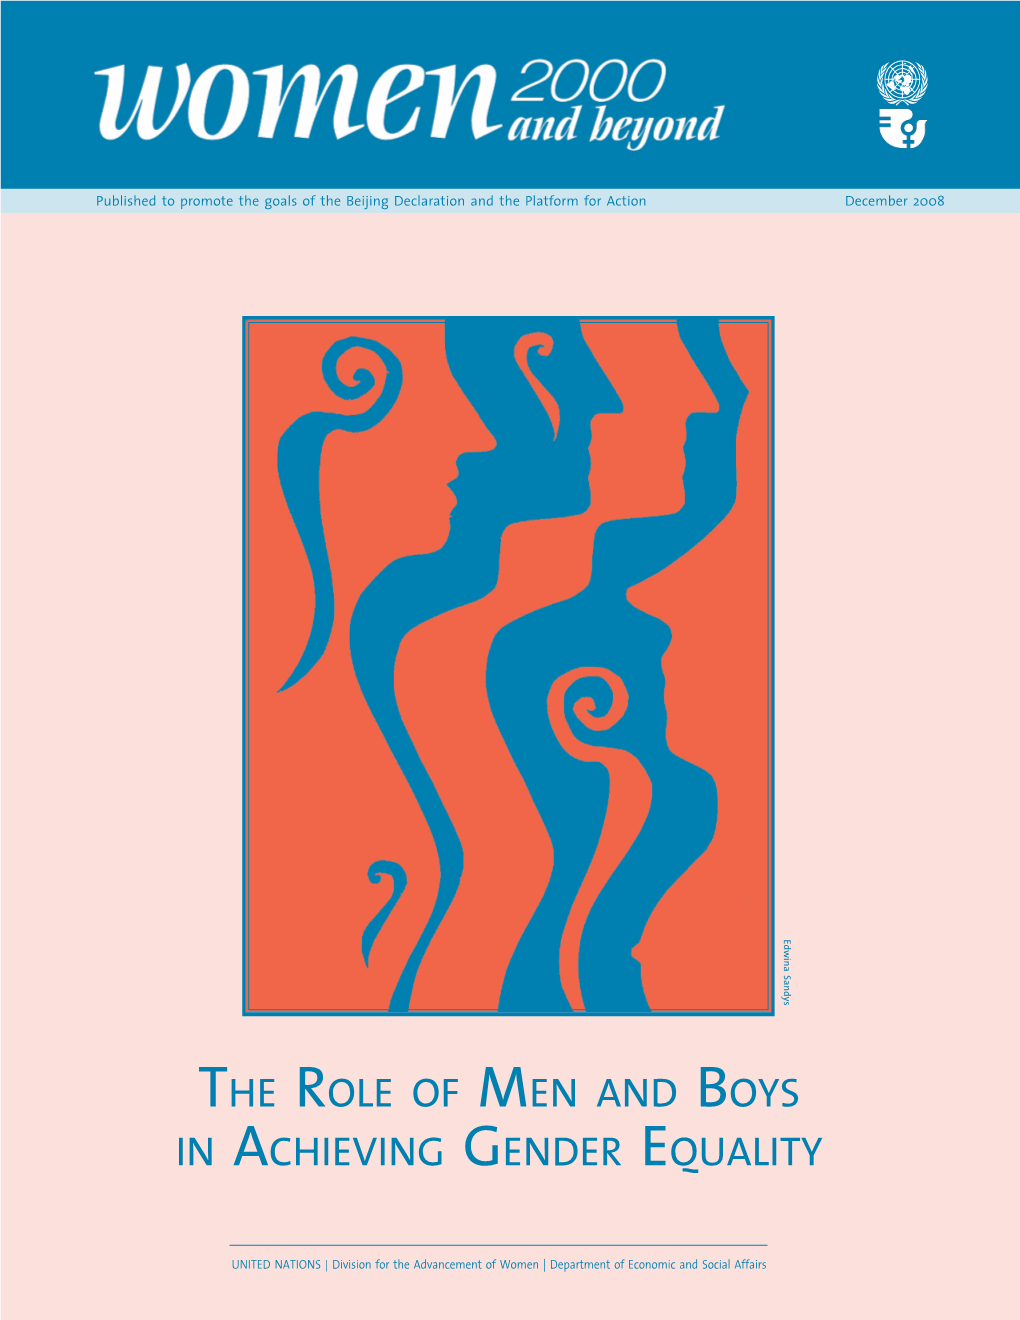 The Role of Men and Boys in Achieving